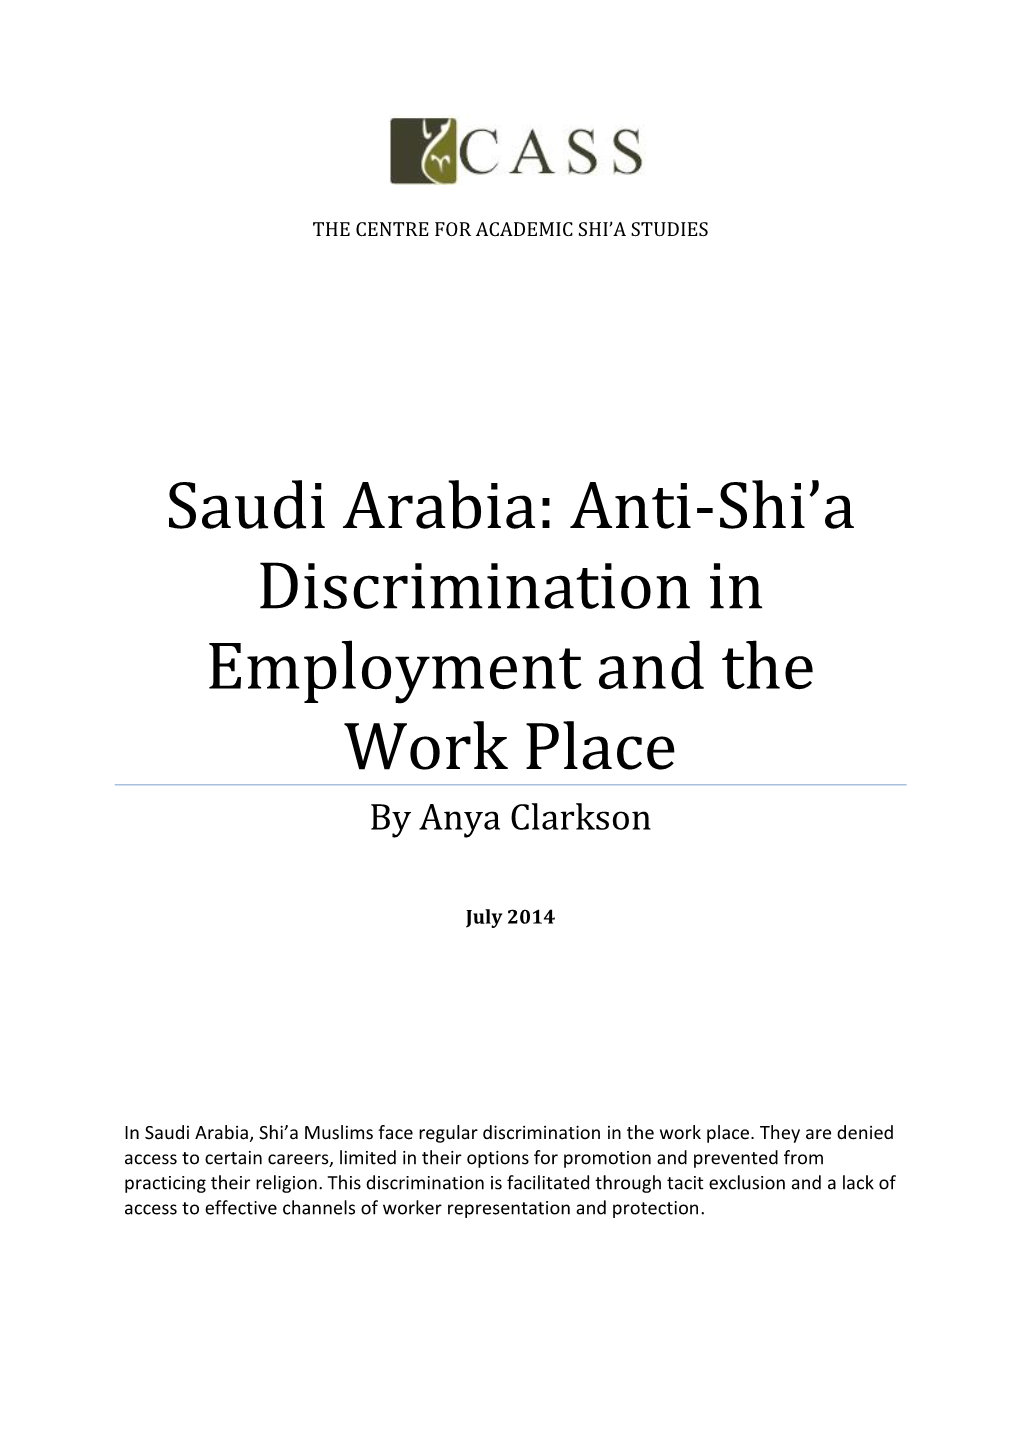 Saudi Arabia: Anti-Shi’A Discrimination in Employment and the Work Place by Anya Clarkson